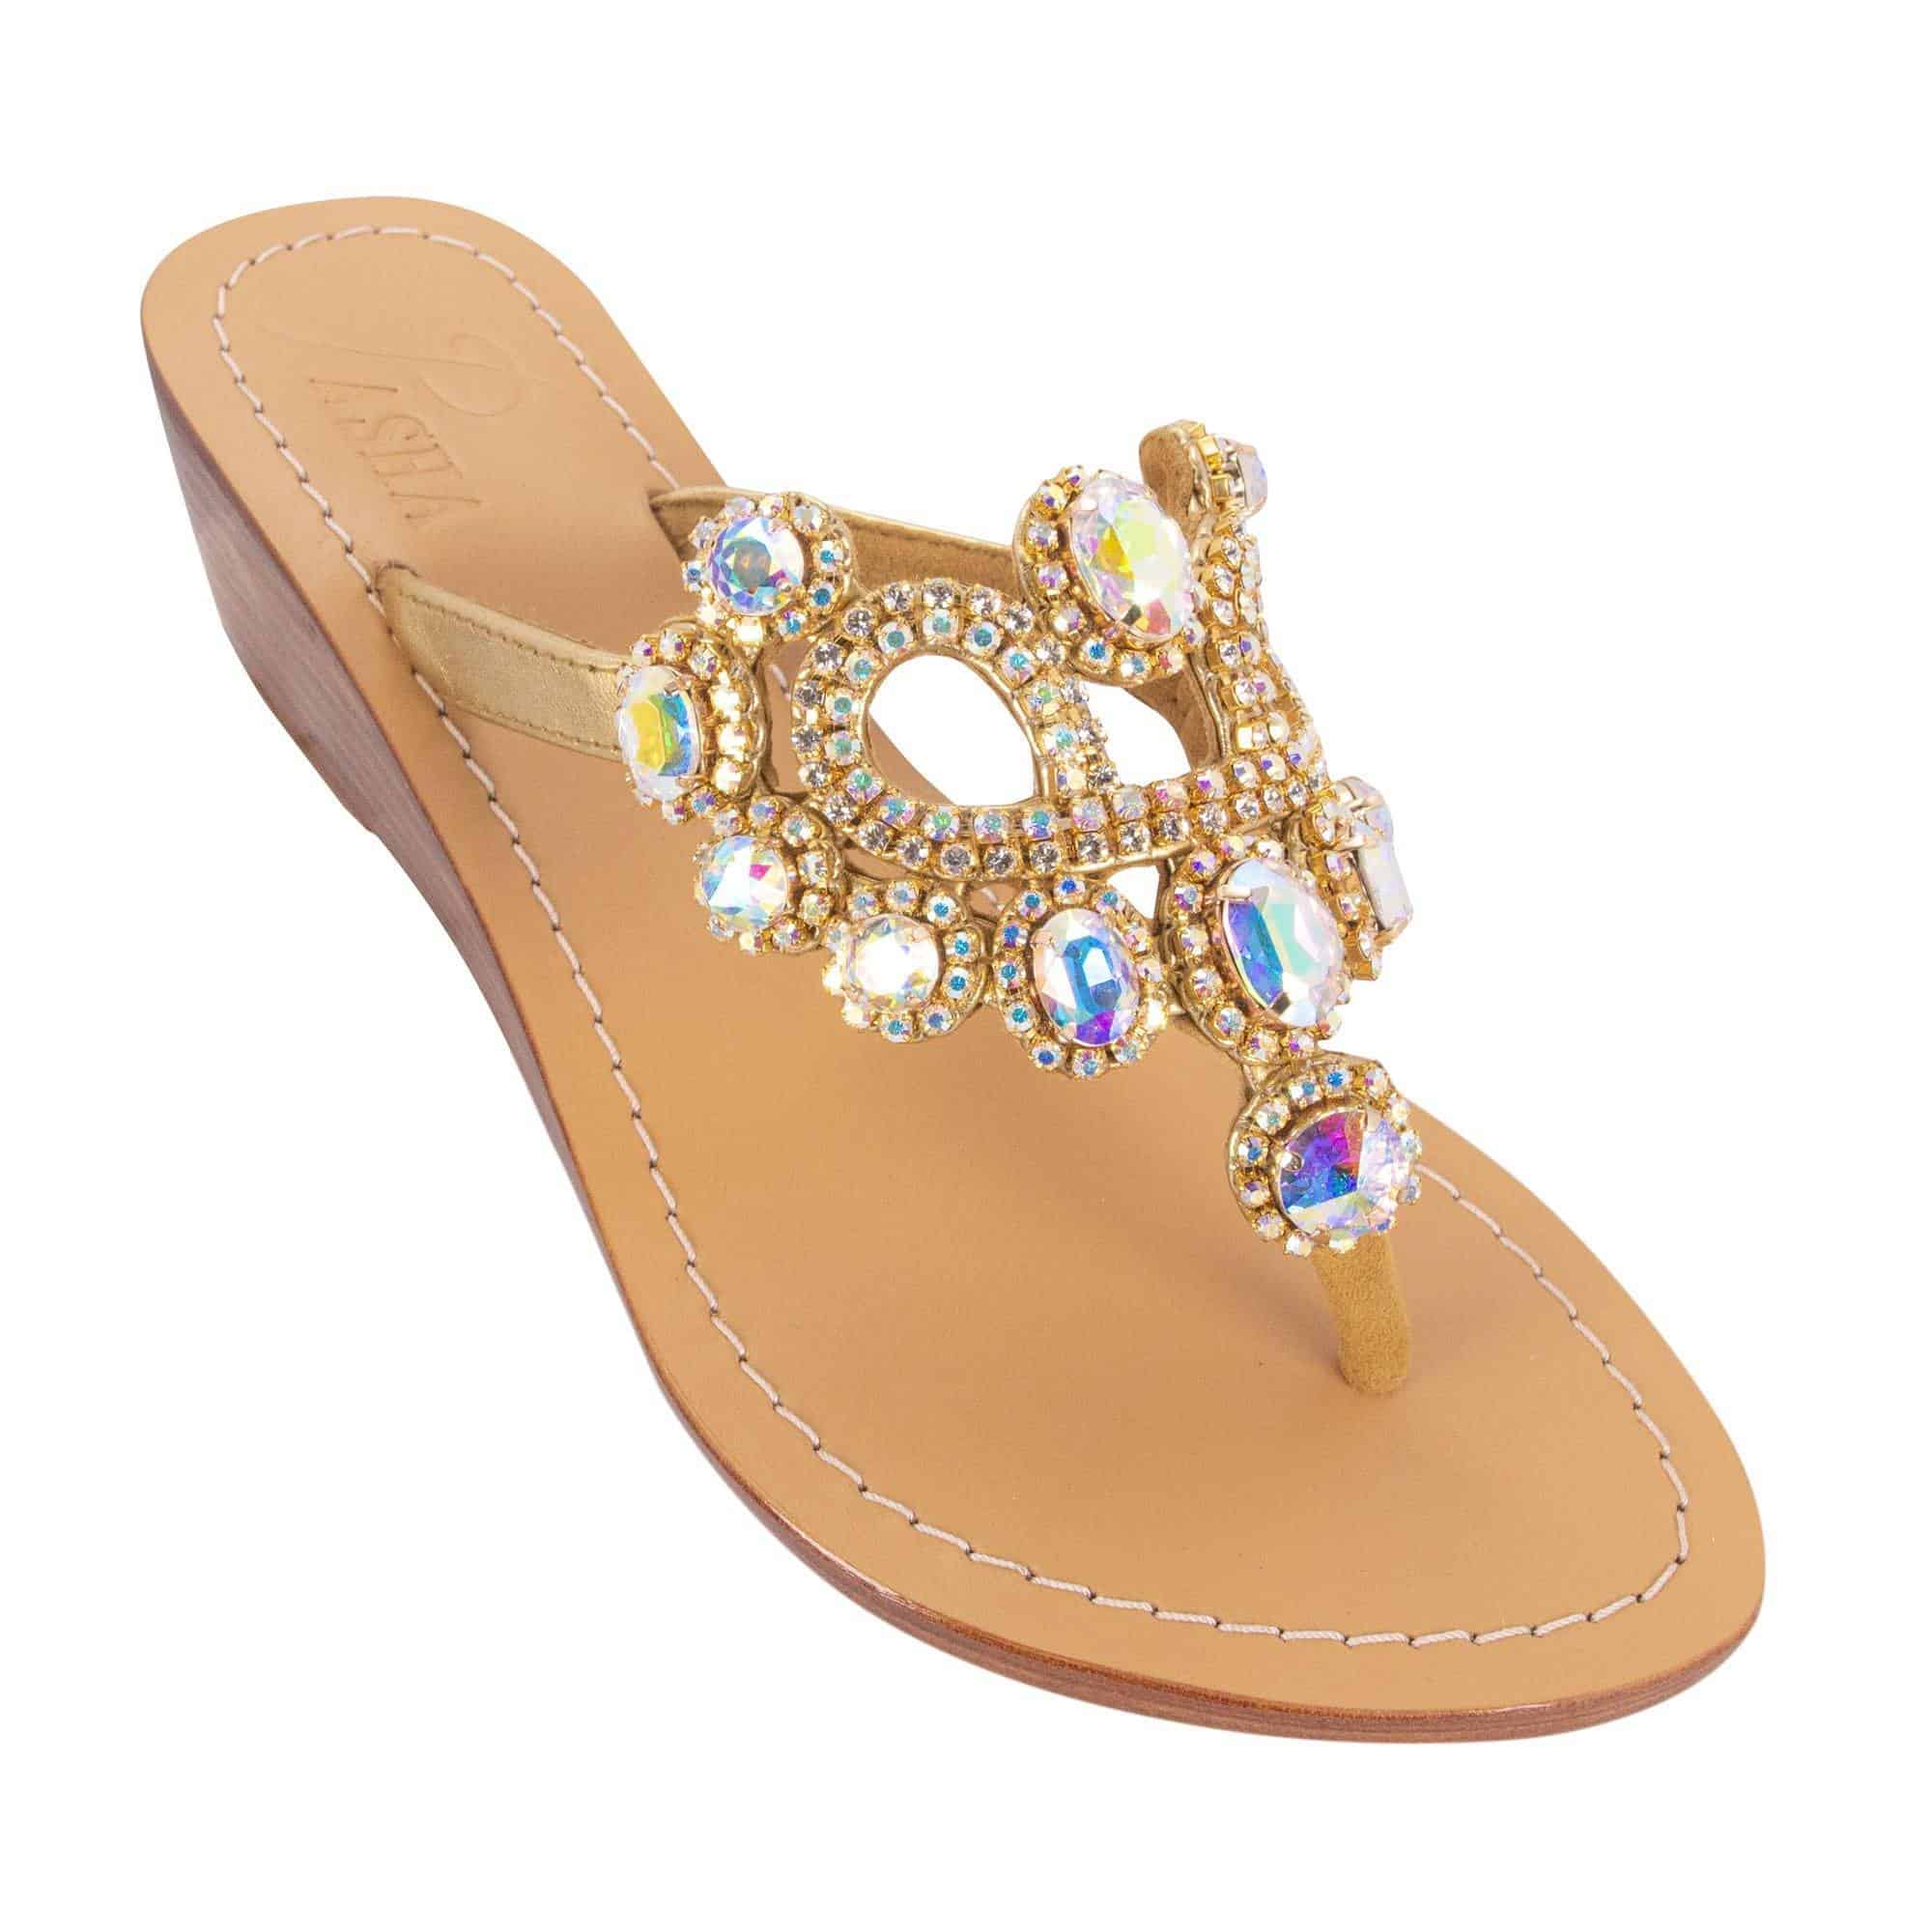 ST. VINCENT - Pasha | Handmade Leather Sandals with Czech Rhinestones - 